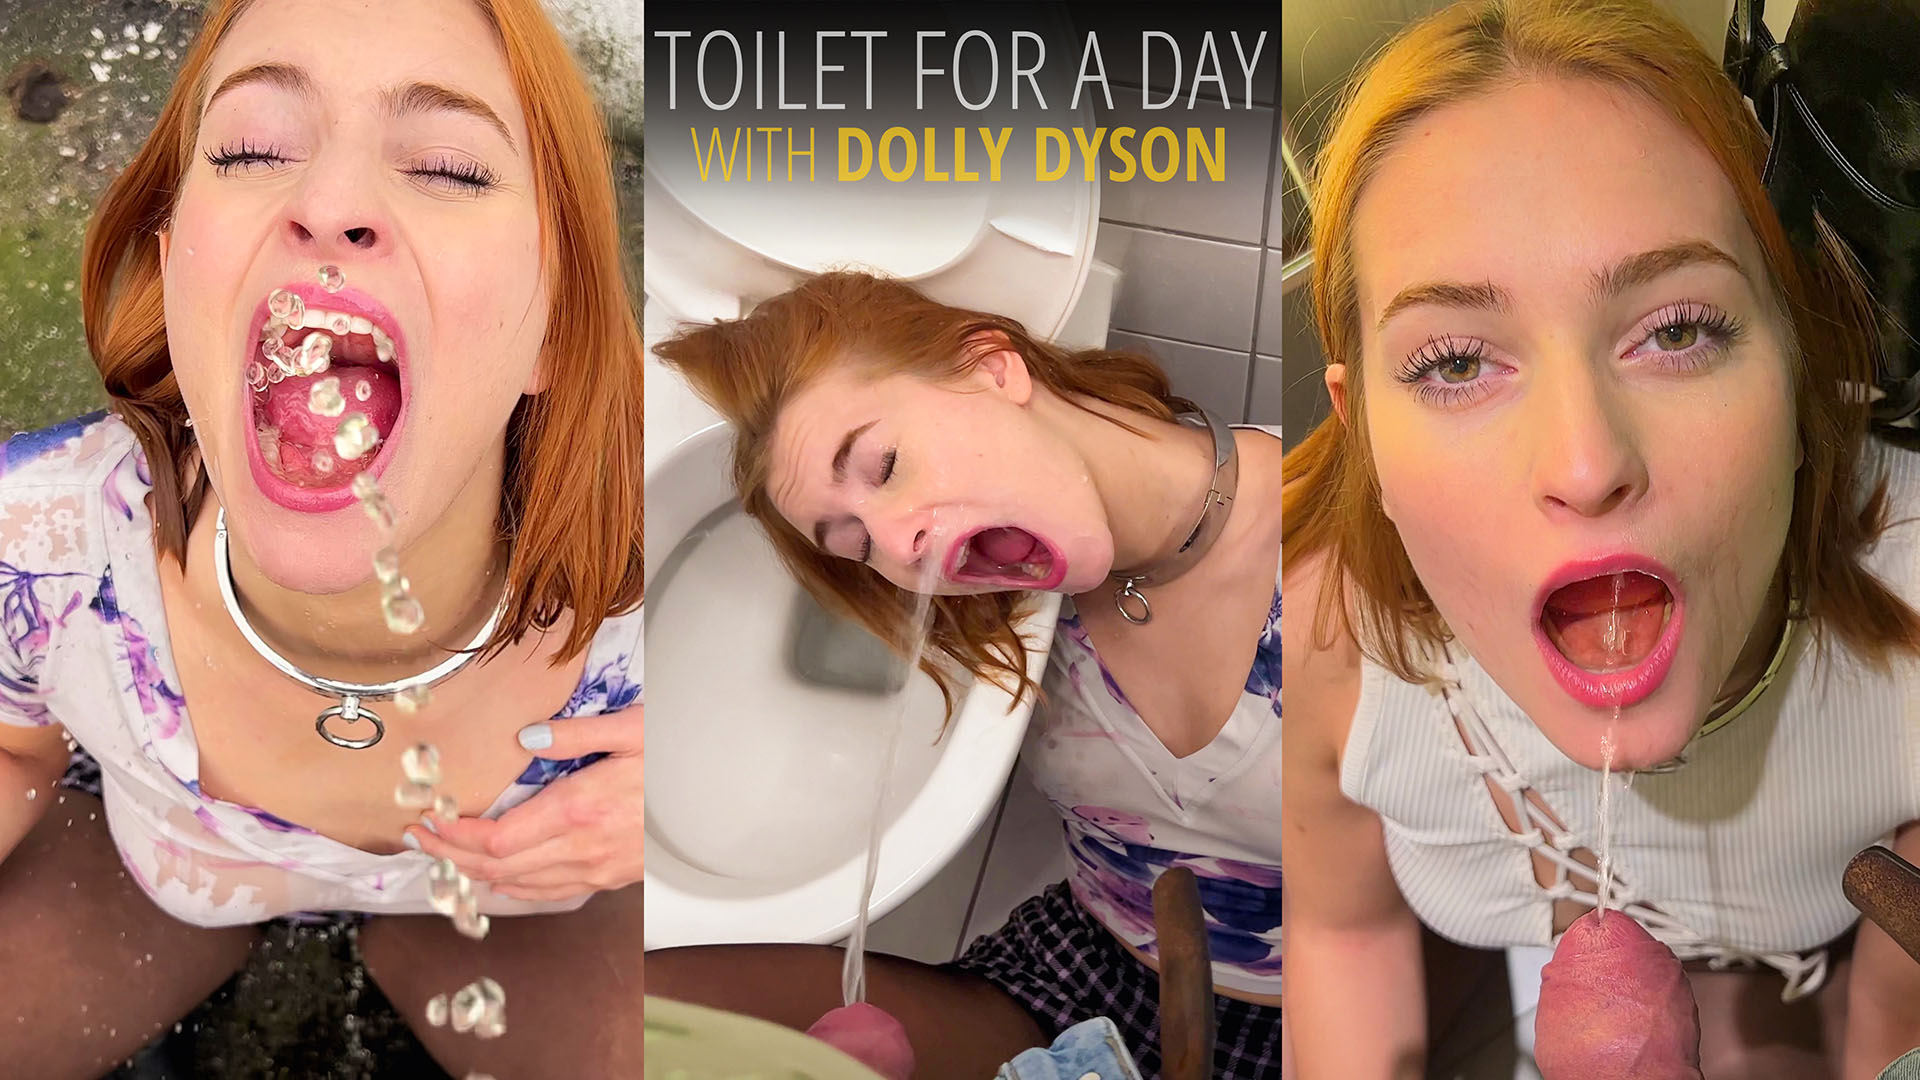 Thumbnail for Toilet for a Day with Dolly Dyson